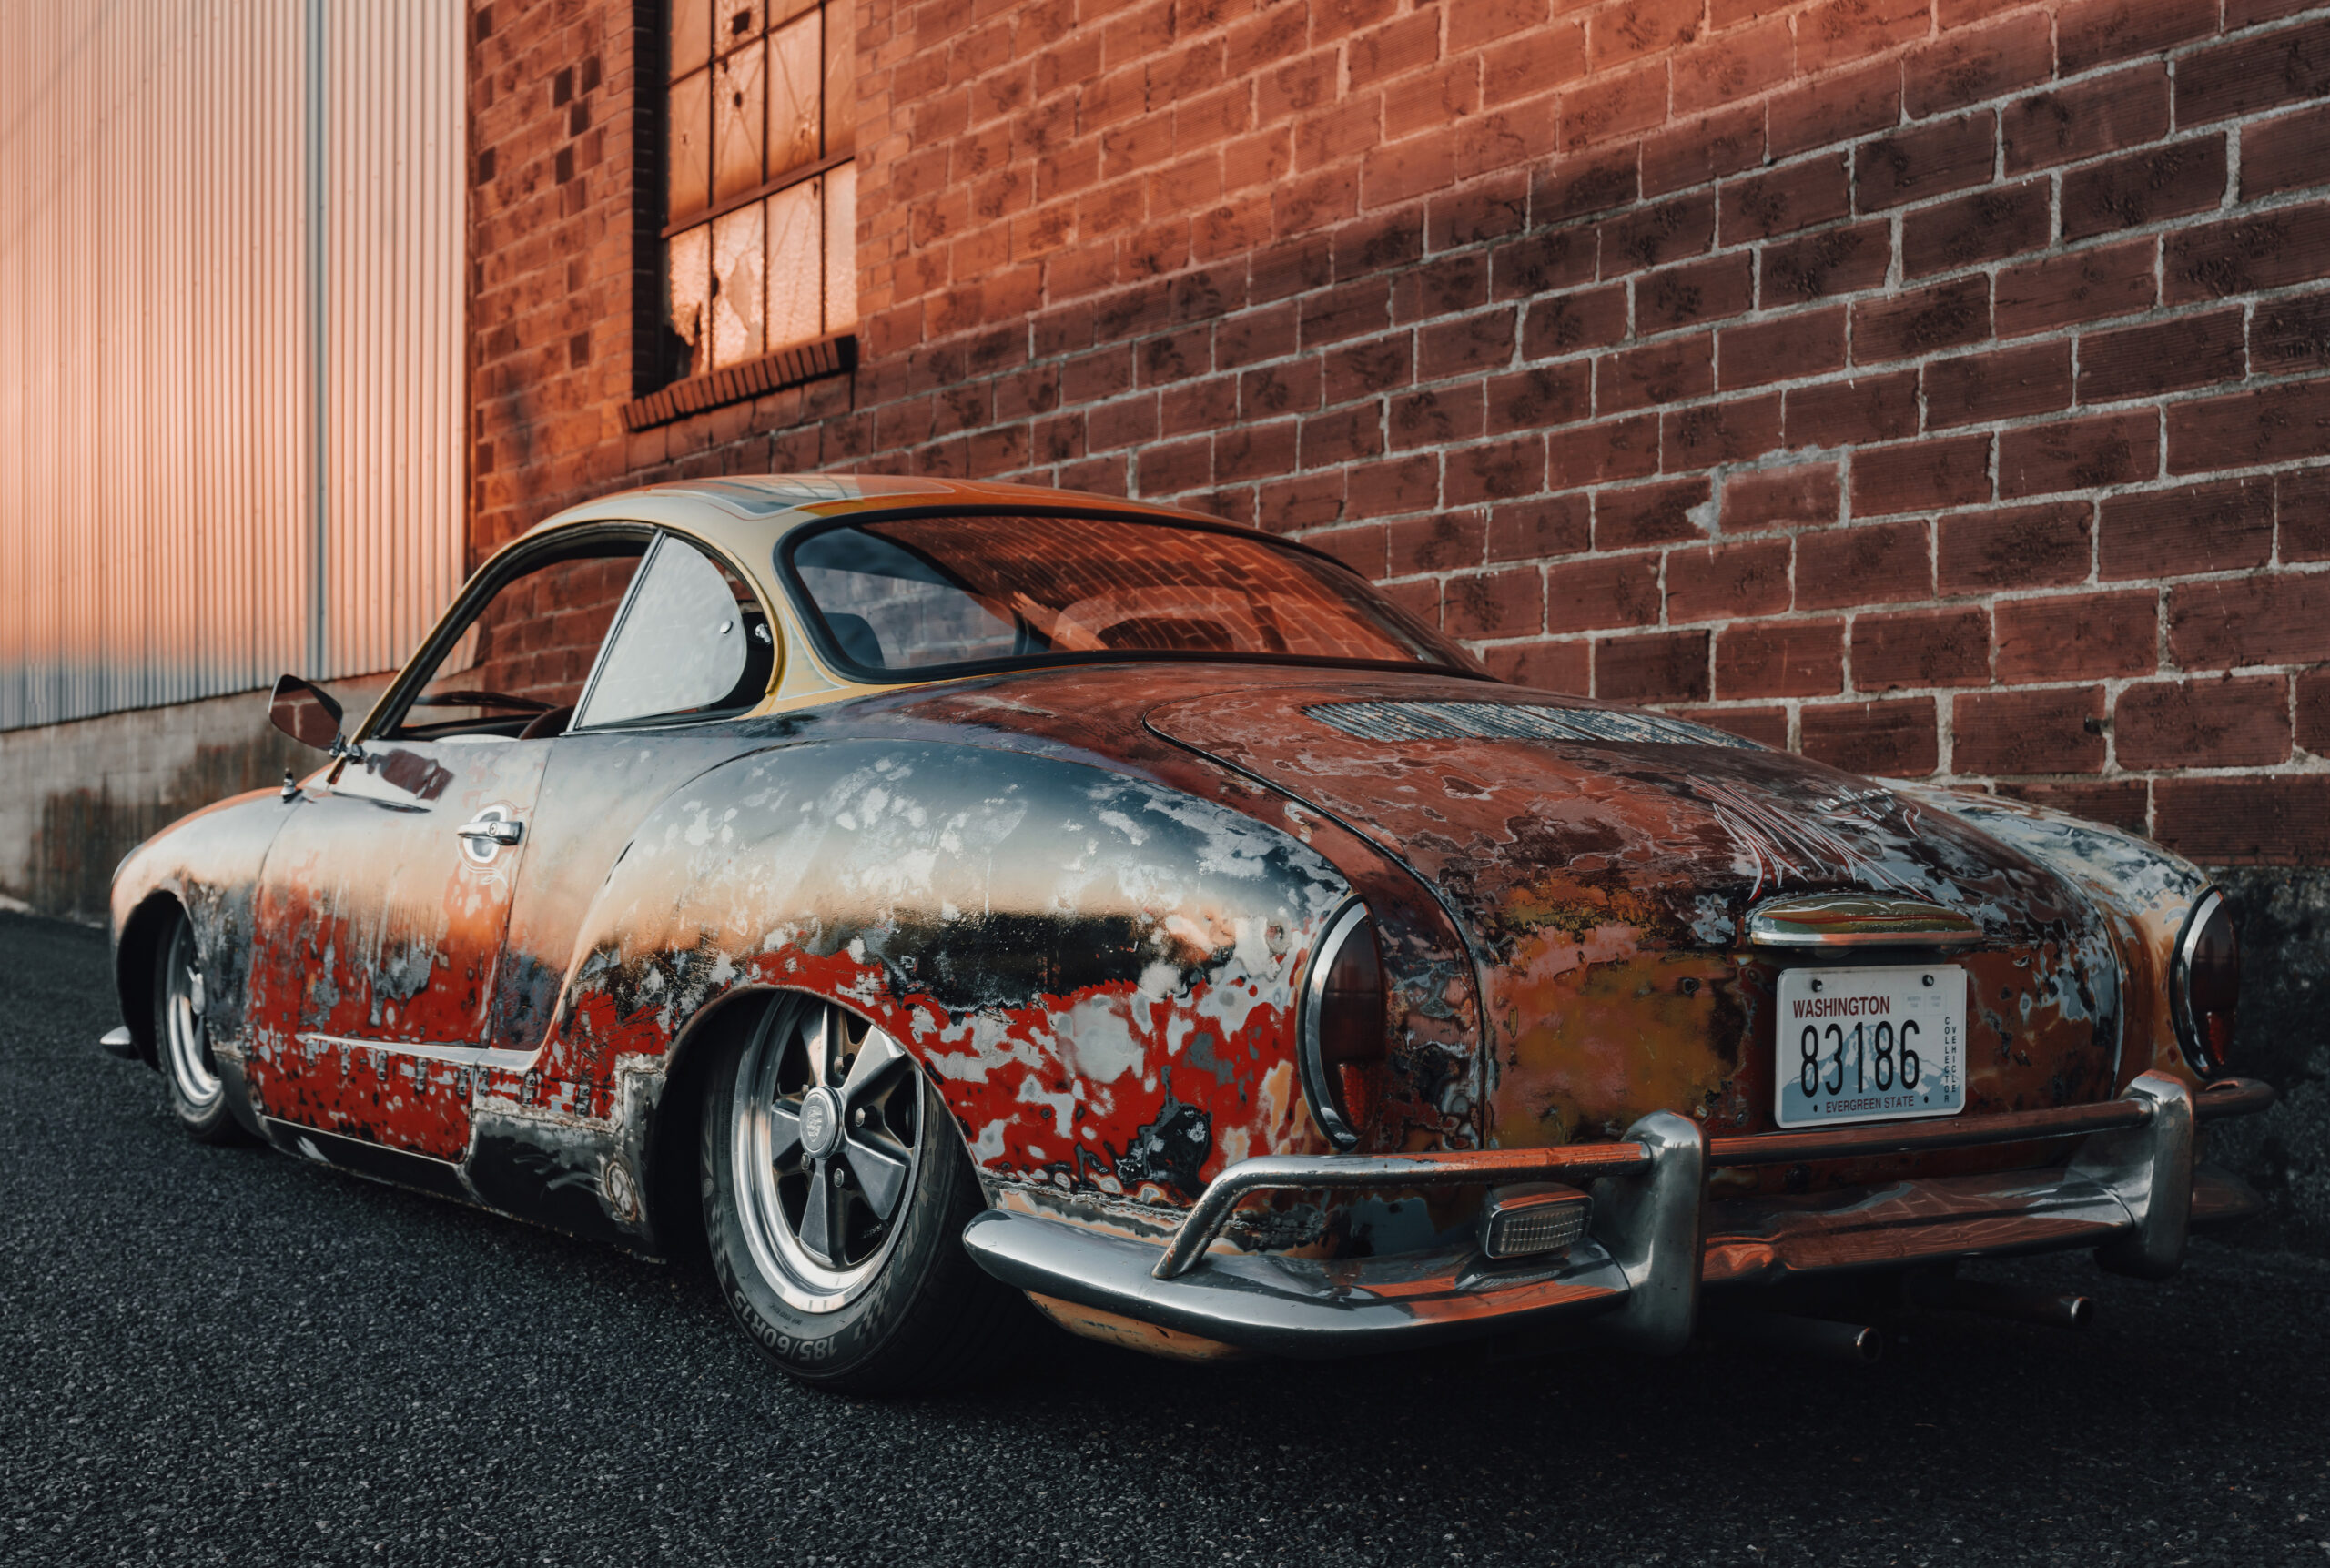 Karmann Ghia with Limebug Deluxe Air Ride Kit fitted